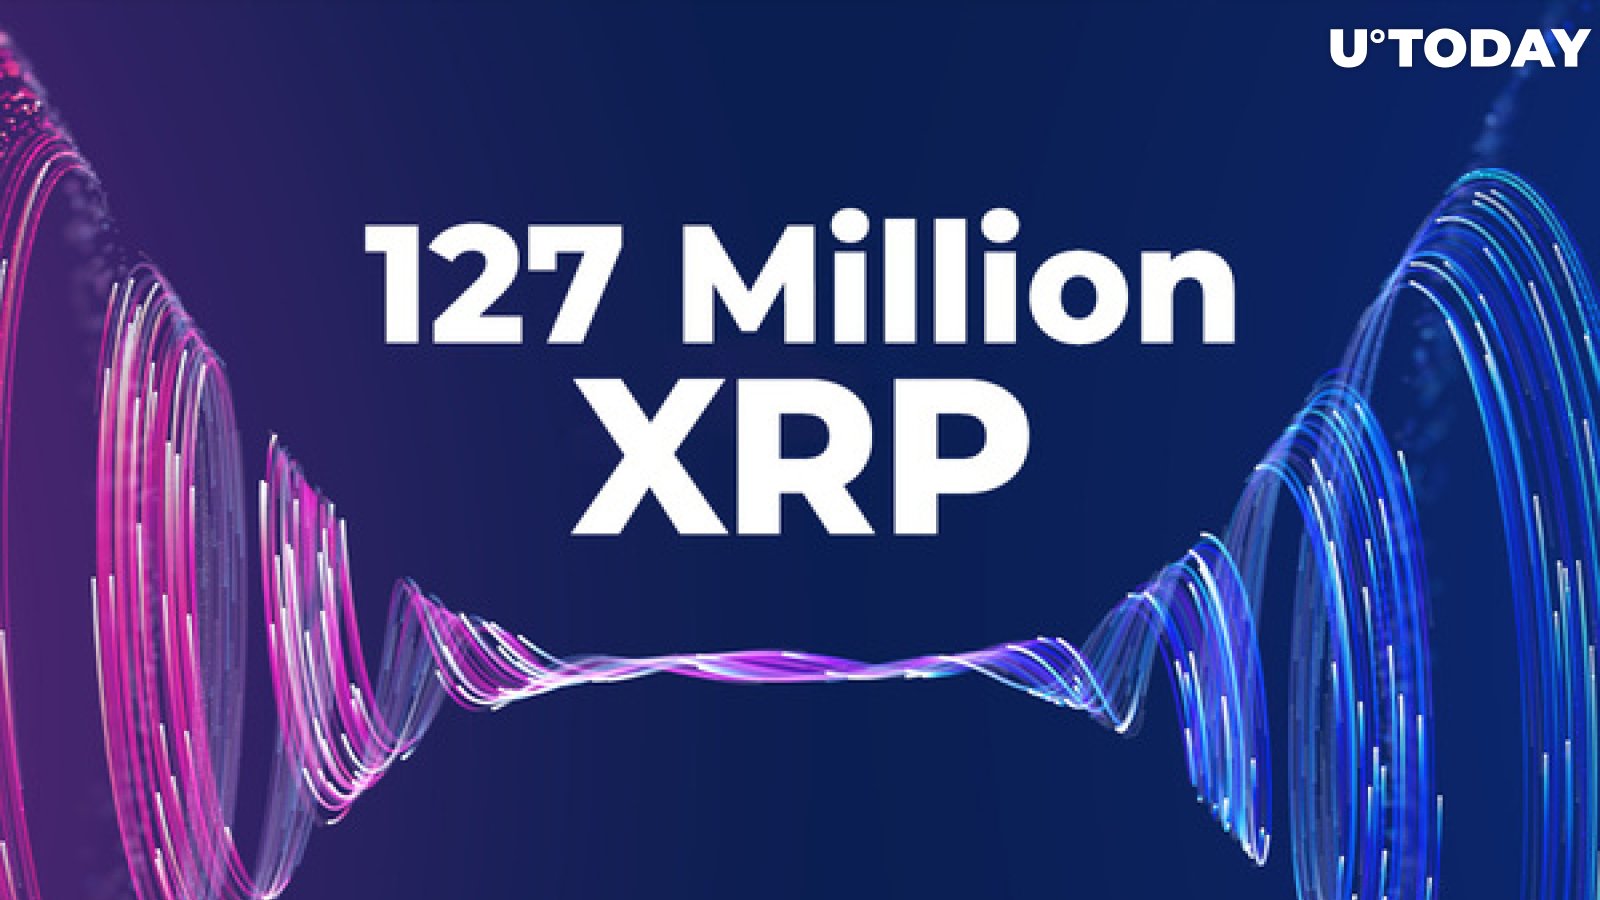 127 Million XRP Moved by Ripple and Binance Crypto Giants